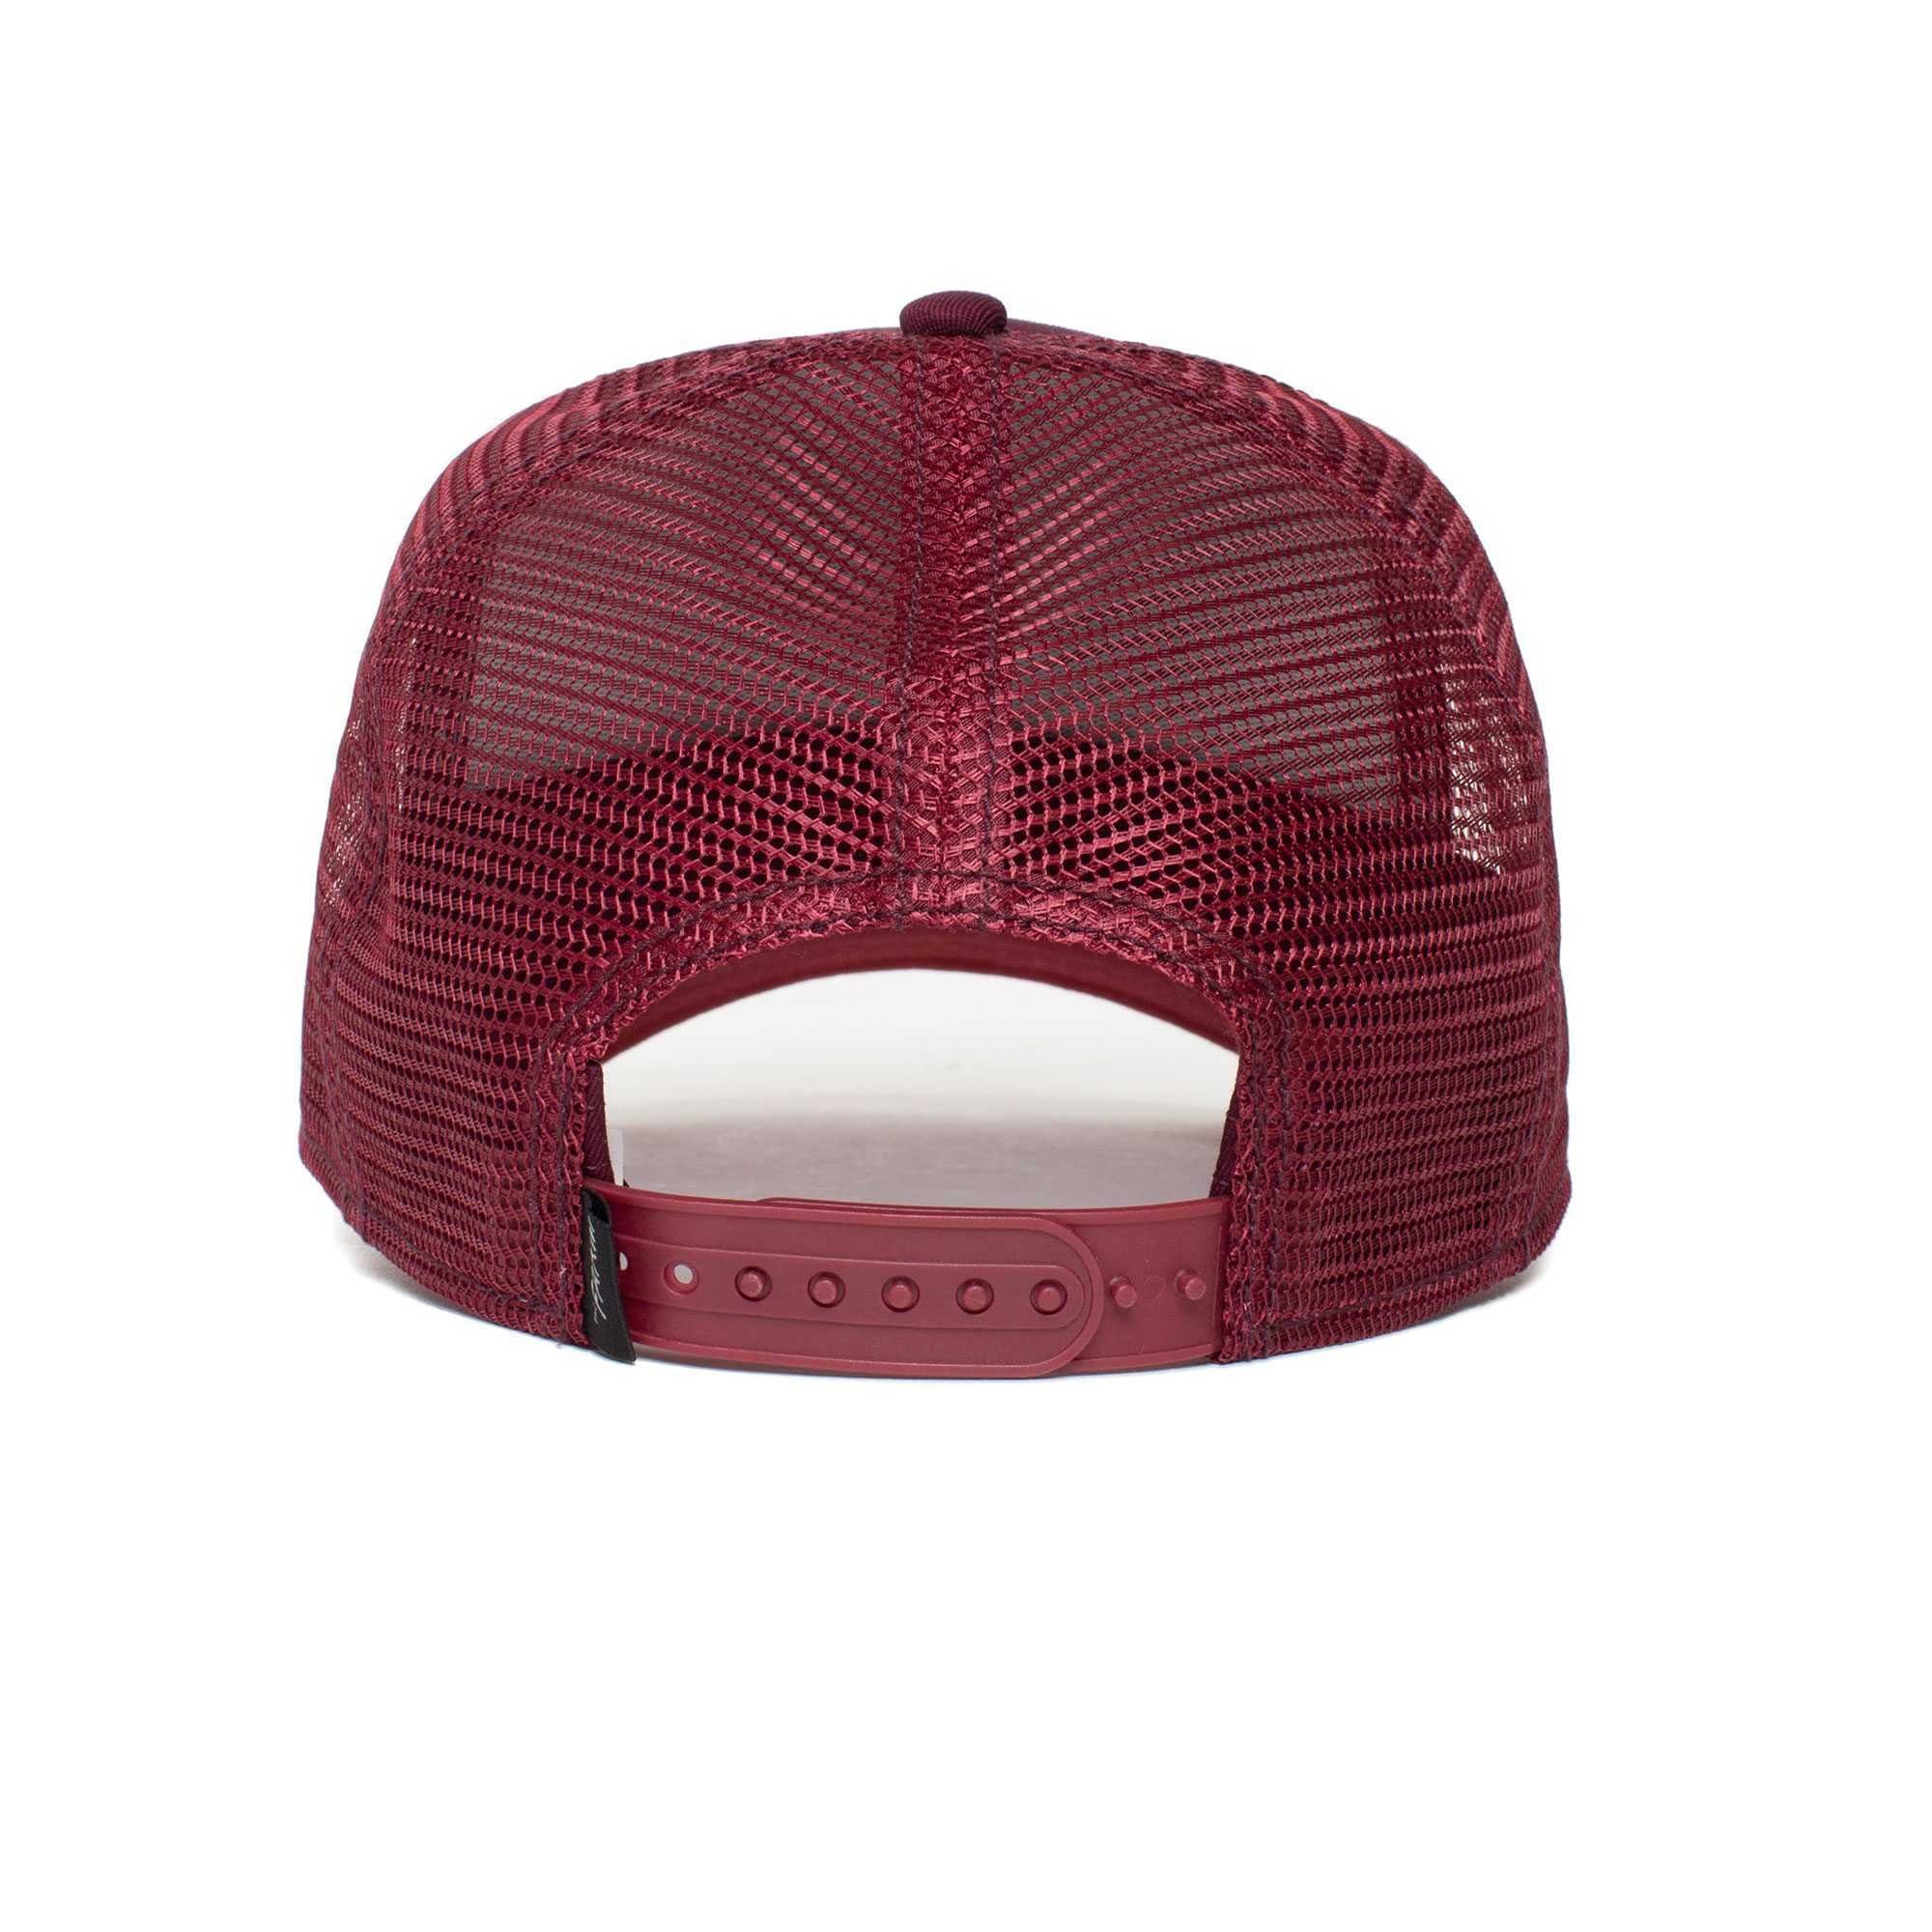 GOORIN Bros. Baseball Cap Unisex Kappe, Size Cap Frontpatch, One - The maroon Panther Trucker